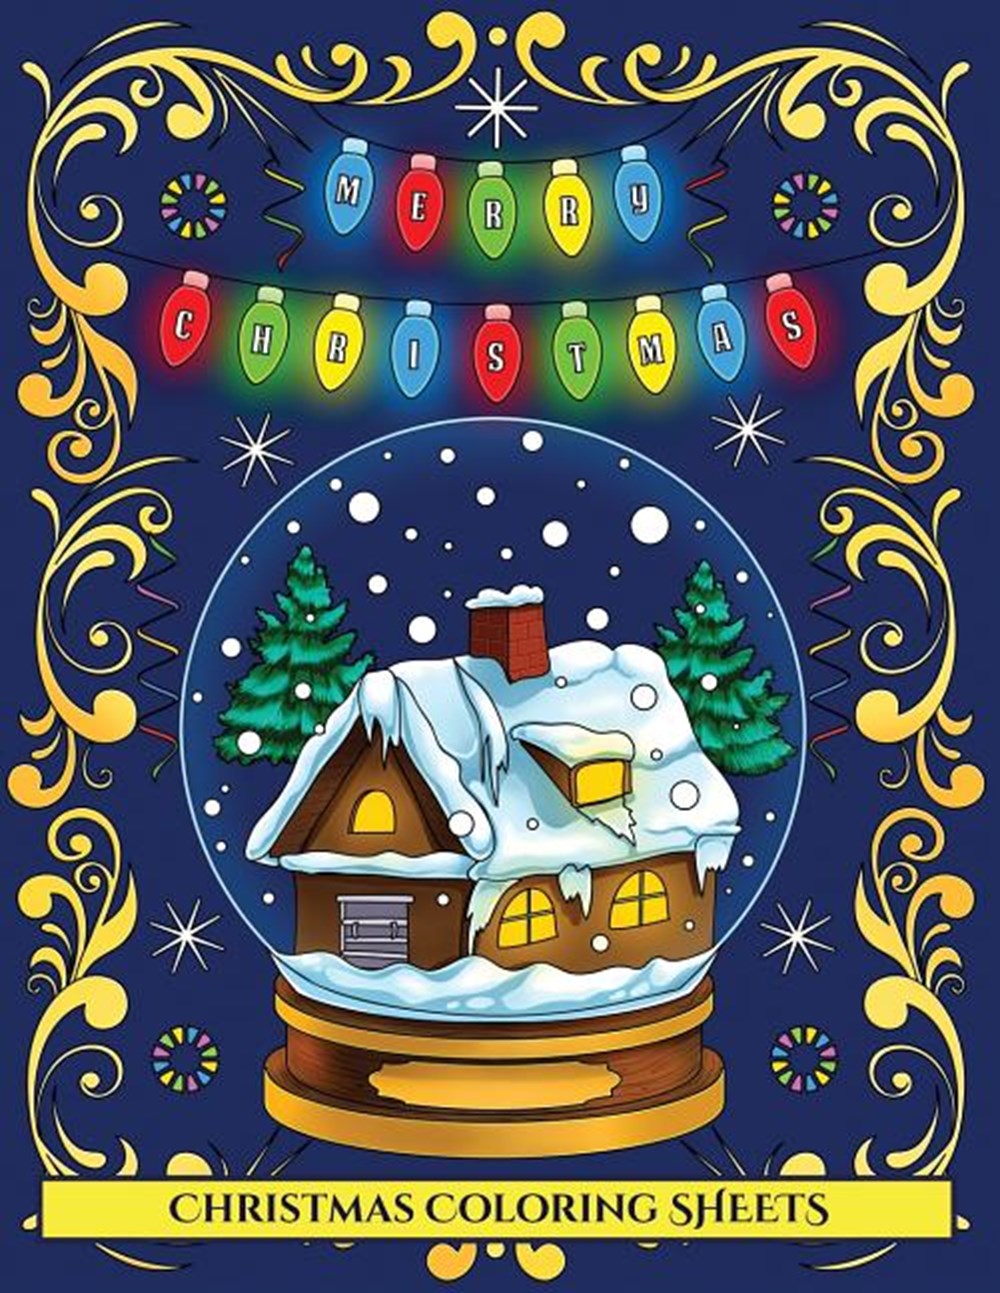 Christmas Coloring Sheets: An adult coloring (colouring) book with 30 unique Christmas coloring page